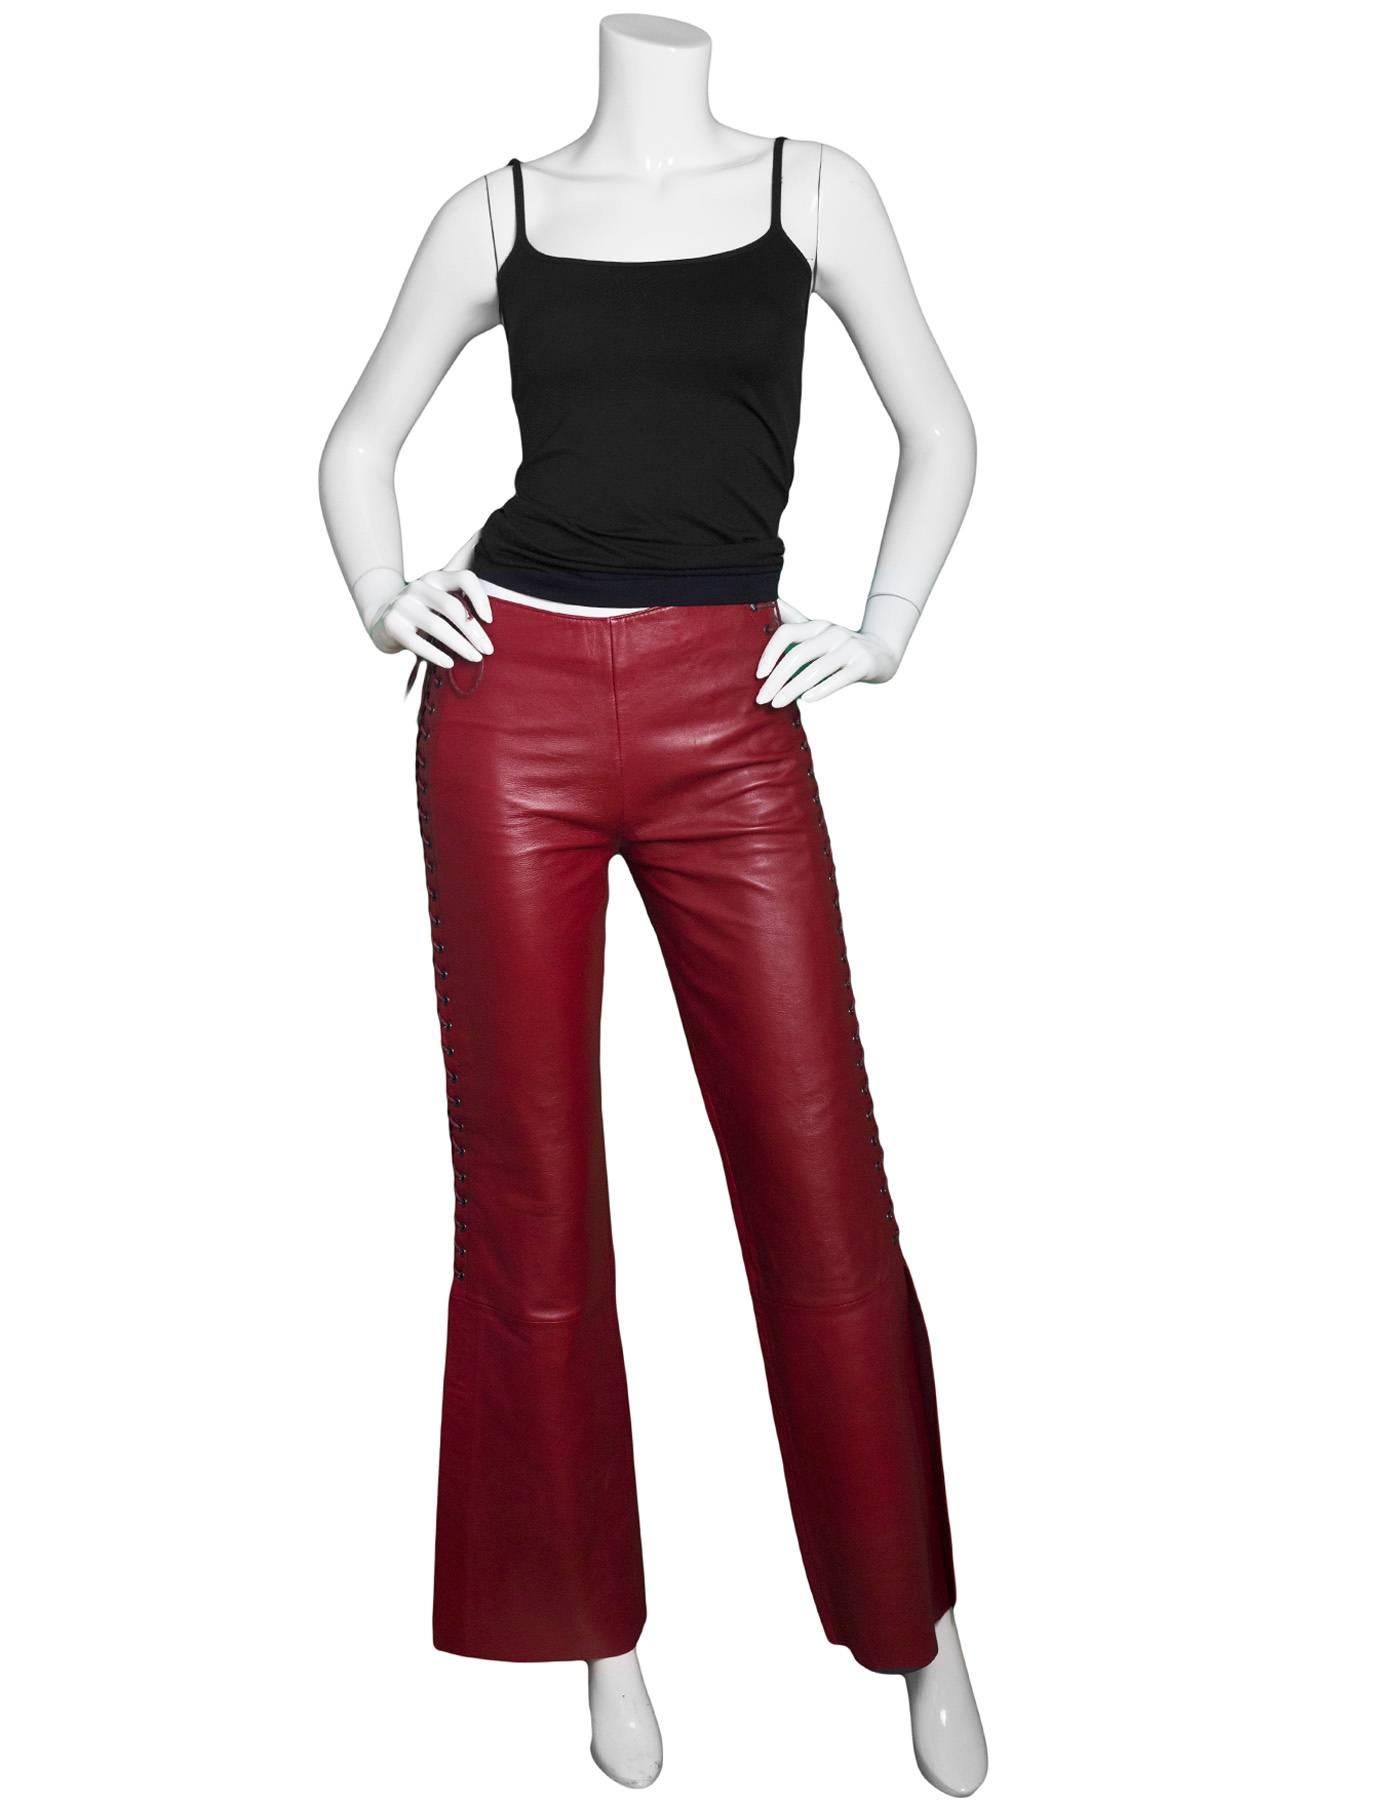 Catherine Malandrino Red Leather Lace Up Pants Sz 2

Made In: China
Color: Red
Closure/Opening: Side lace to closures
Exterior Pockets: Nnoe
Interior Pockets: None
Overall Condition: Excellent pre-owned condition with the exception of being gently